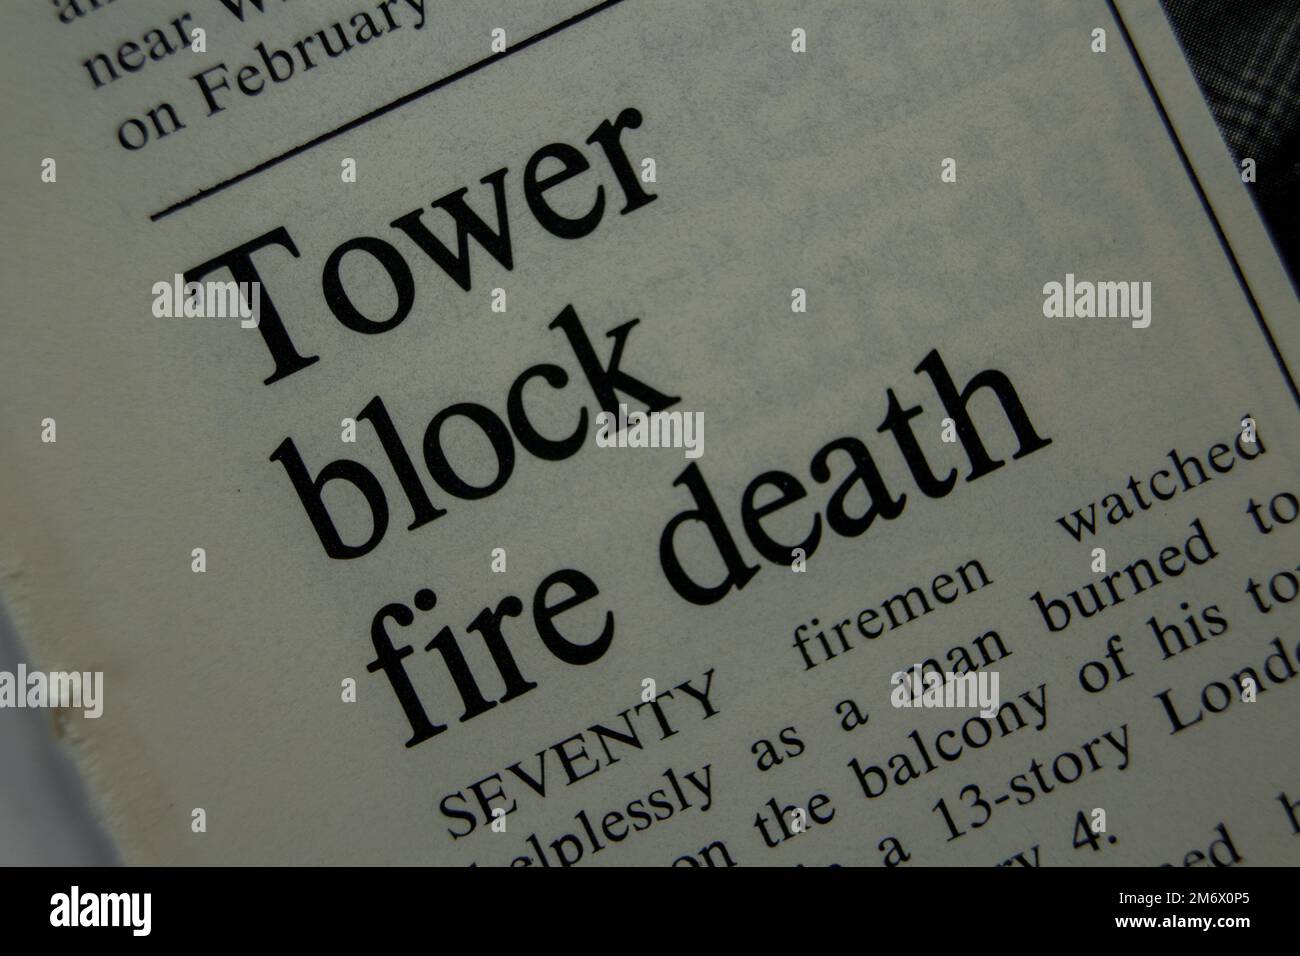 Tower block fire death - news story from 1975 newspaper headline article title Stock Photo